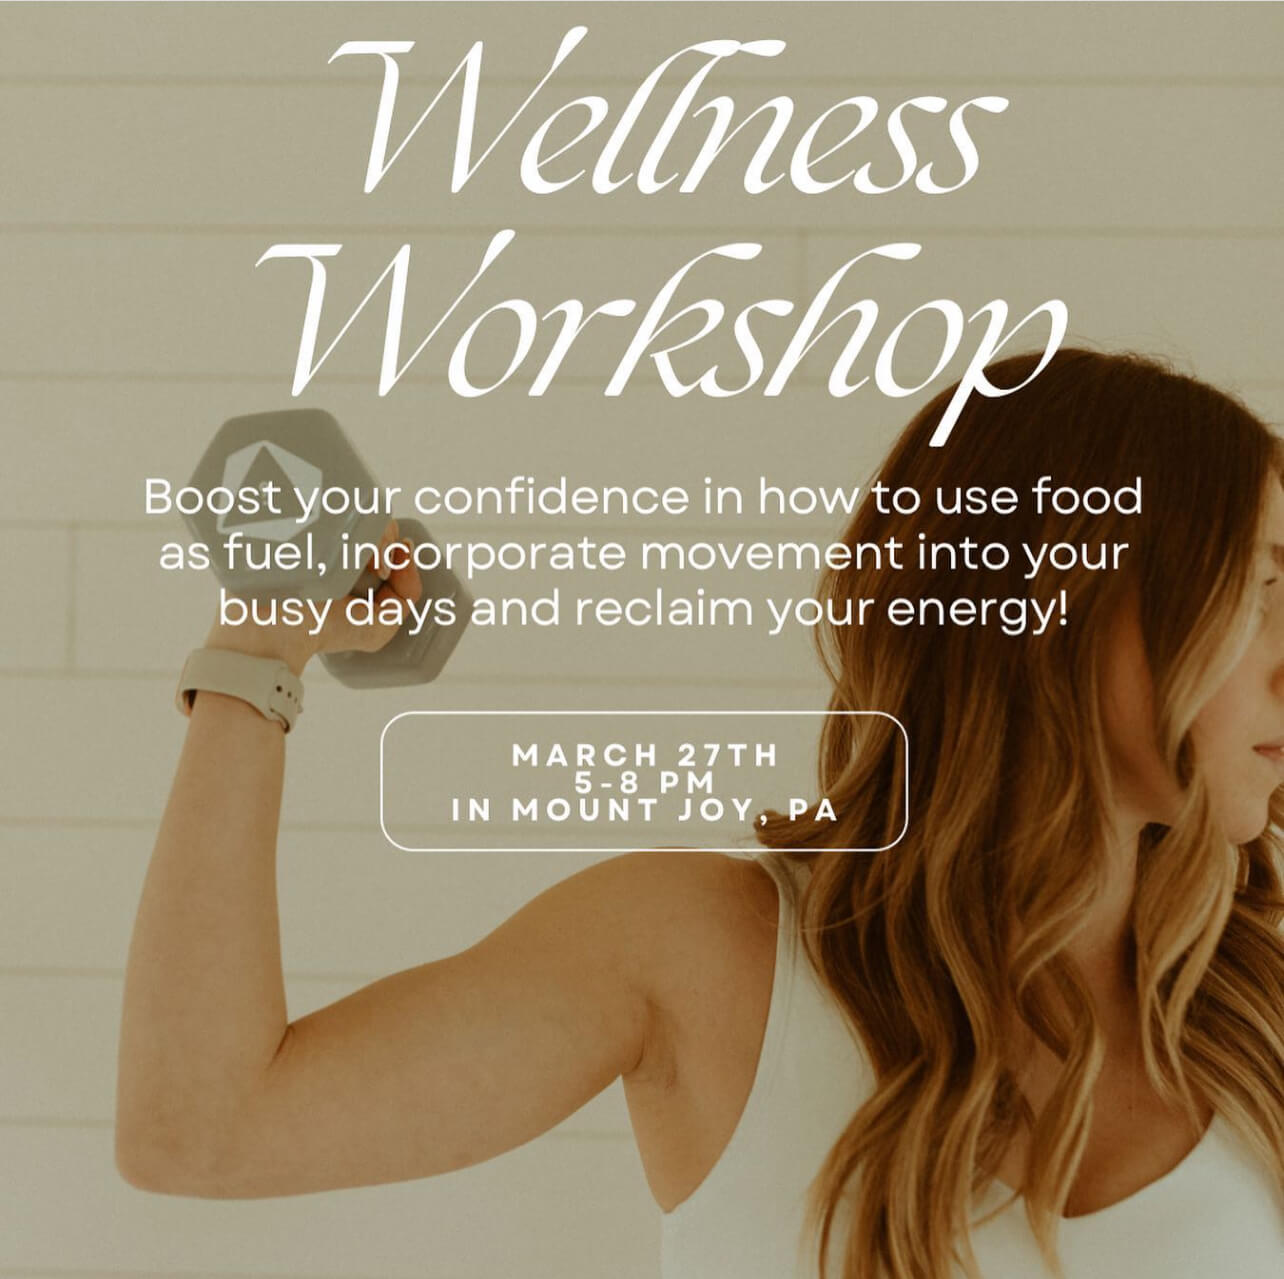 Wellness Workshop with top fitness tips and ways to use food as fuel